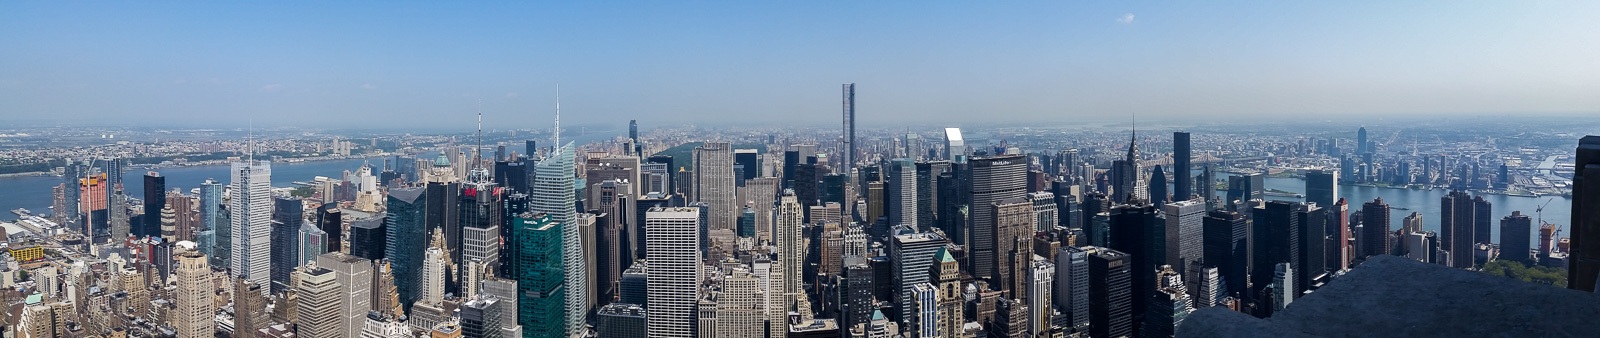 NYC2015- Vue depuis empire state